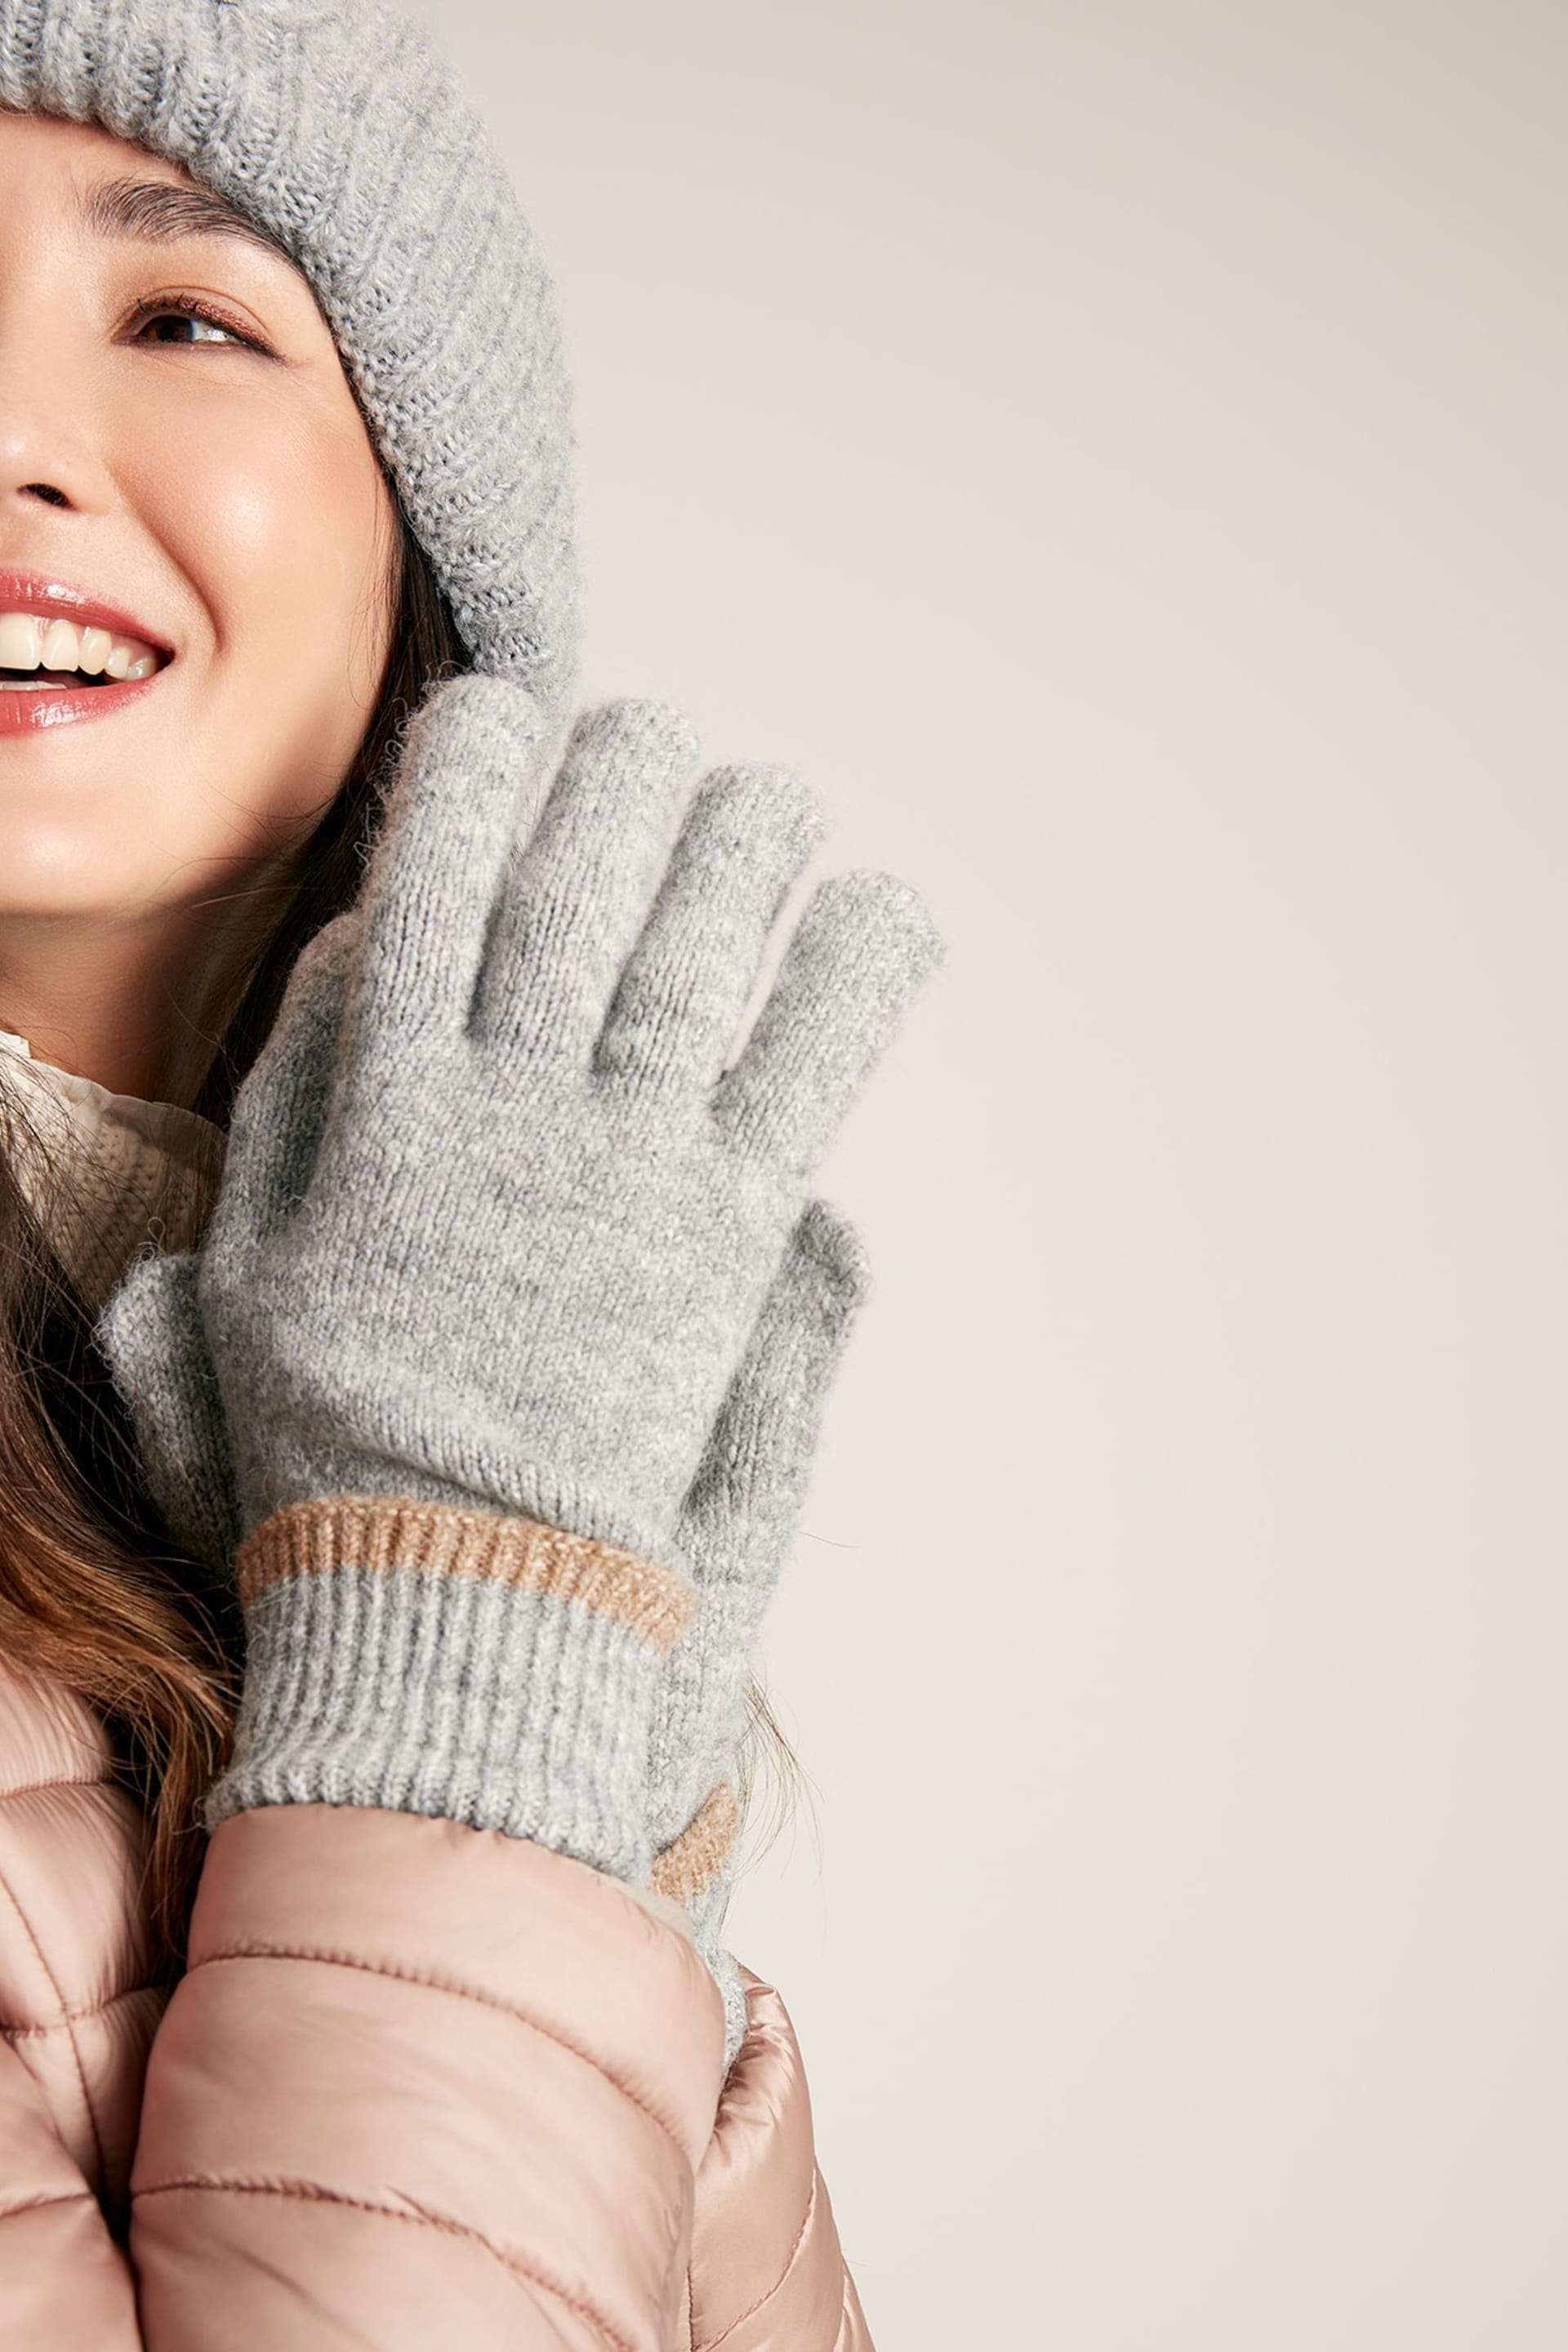 Joules Eloise Grey Knitted Gloves - Image 1 of 3